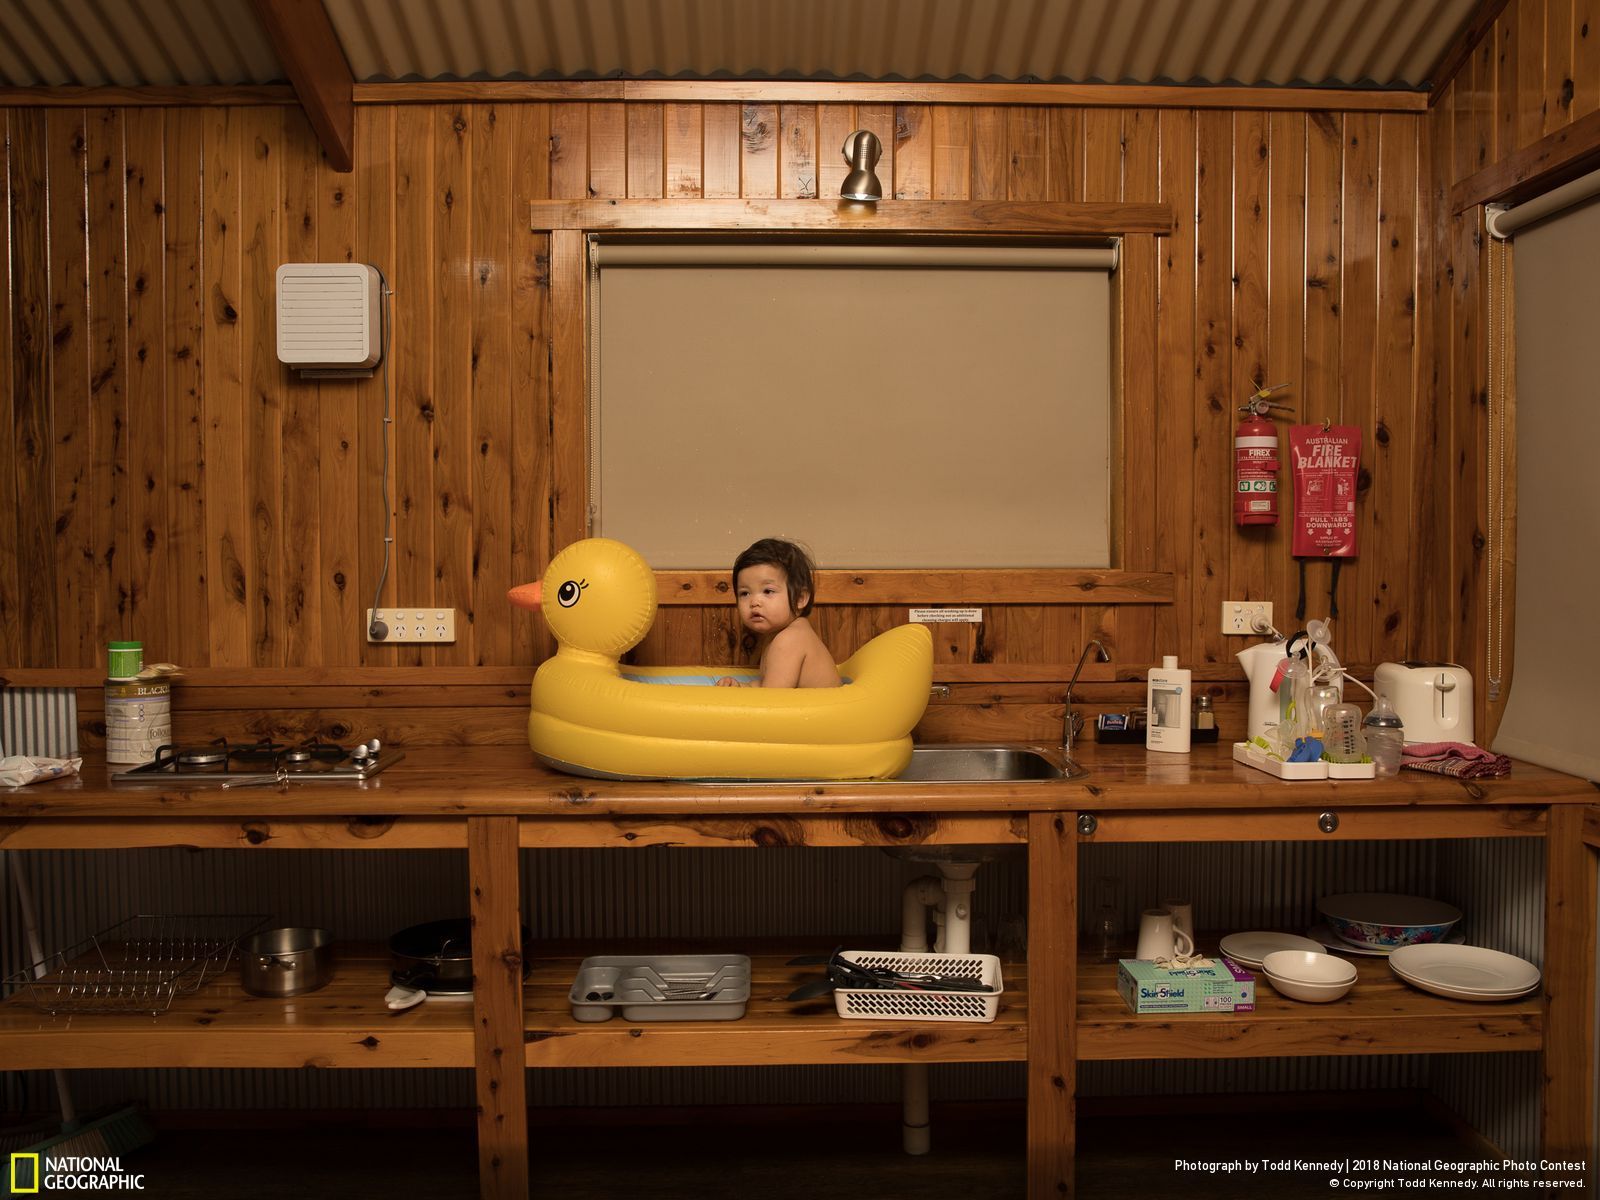 Roadside Motel, © Todd Kennedy, Second Place, People, National Geographic Photo Contest